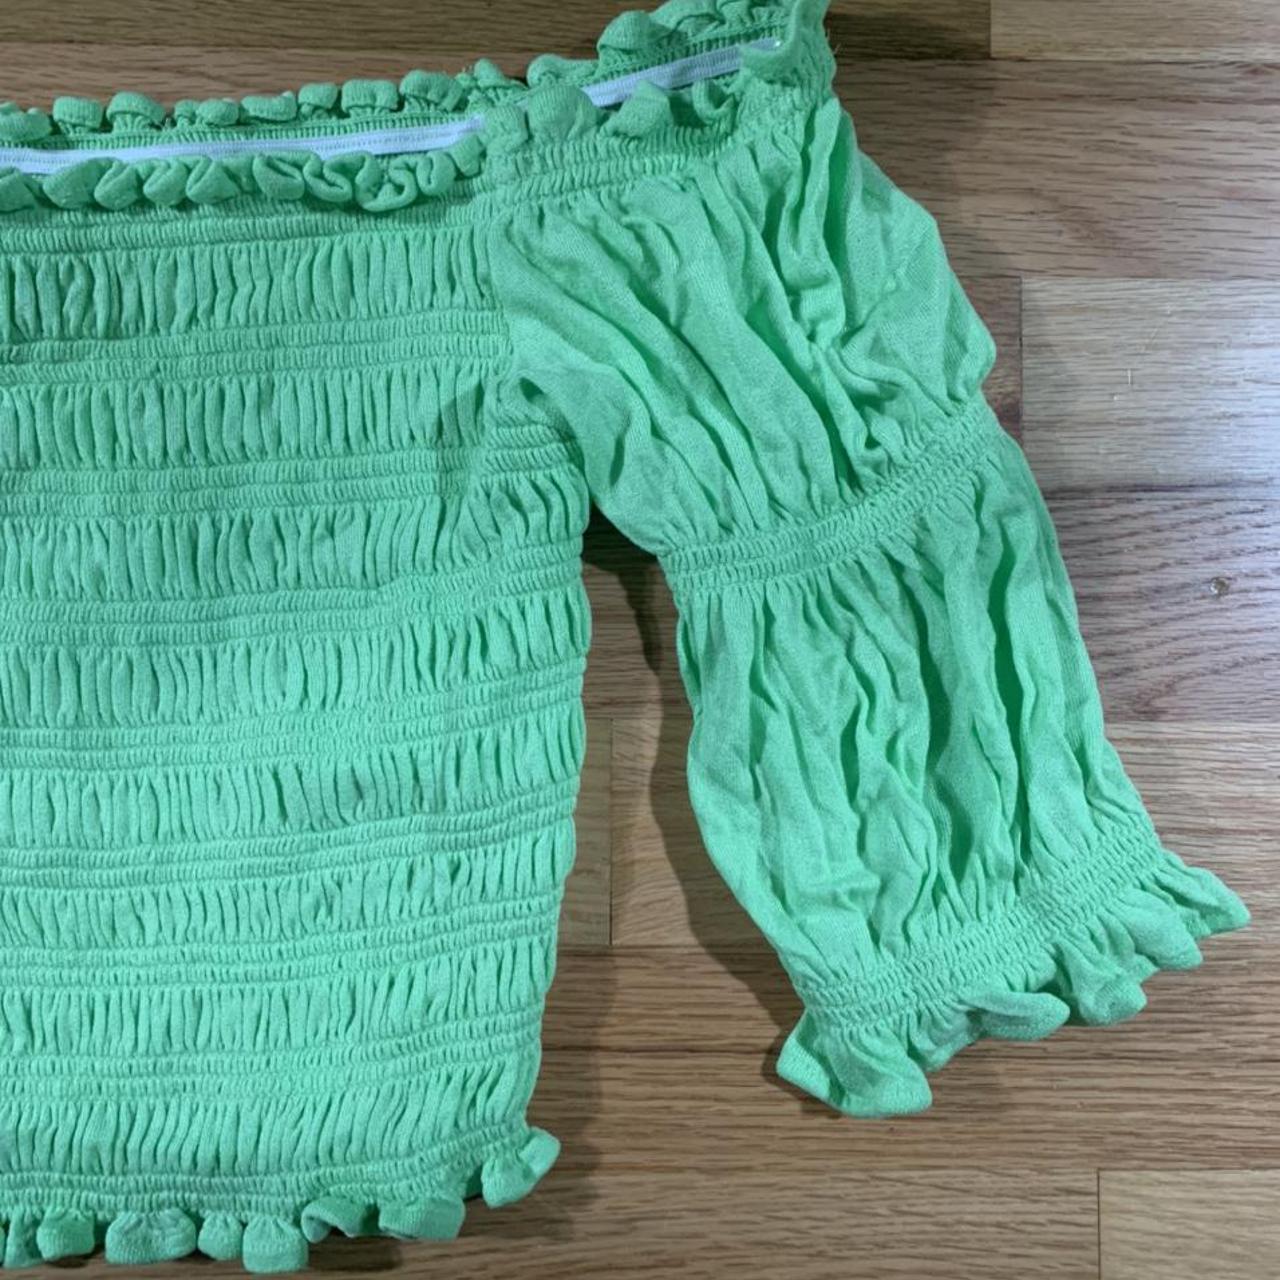 Product Image 3 - Super cute bright green smocked